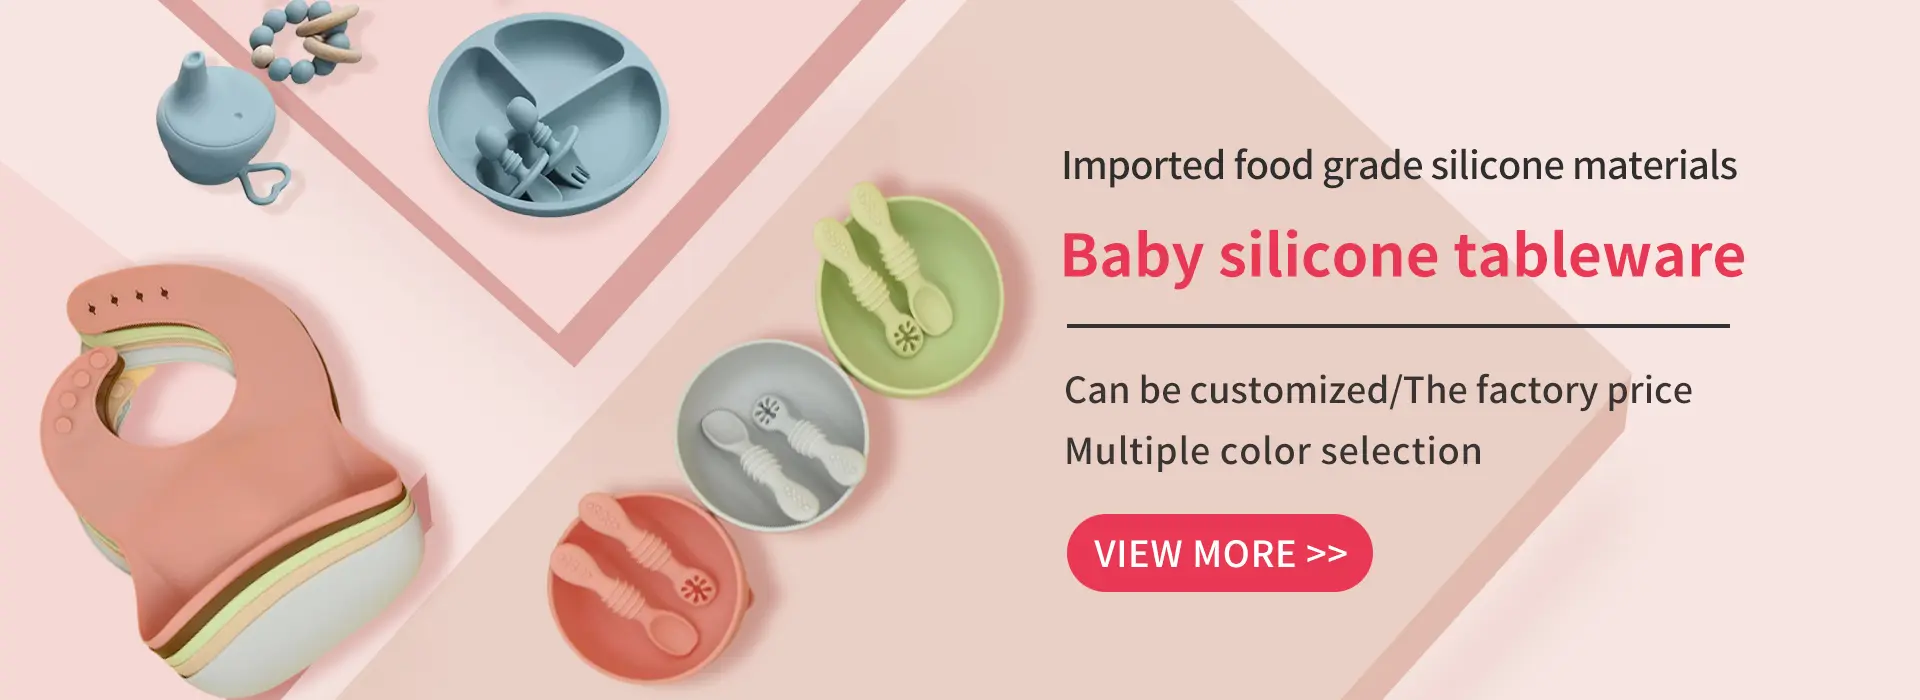 Baby-silicone-tableware